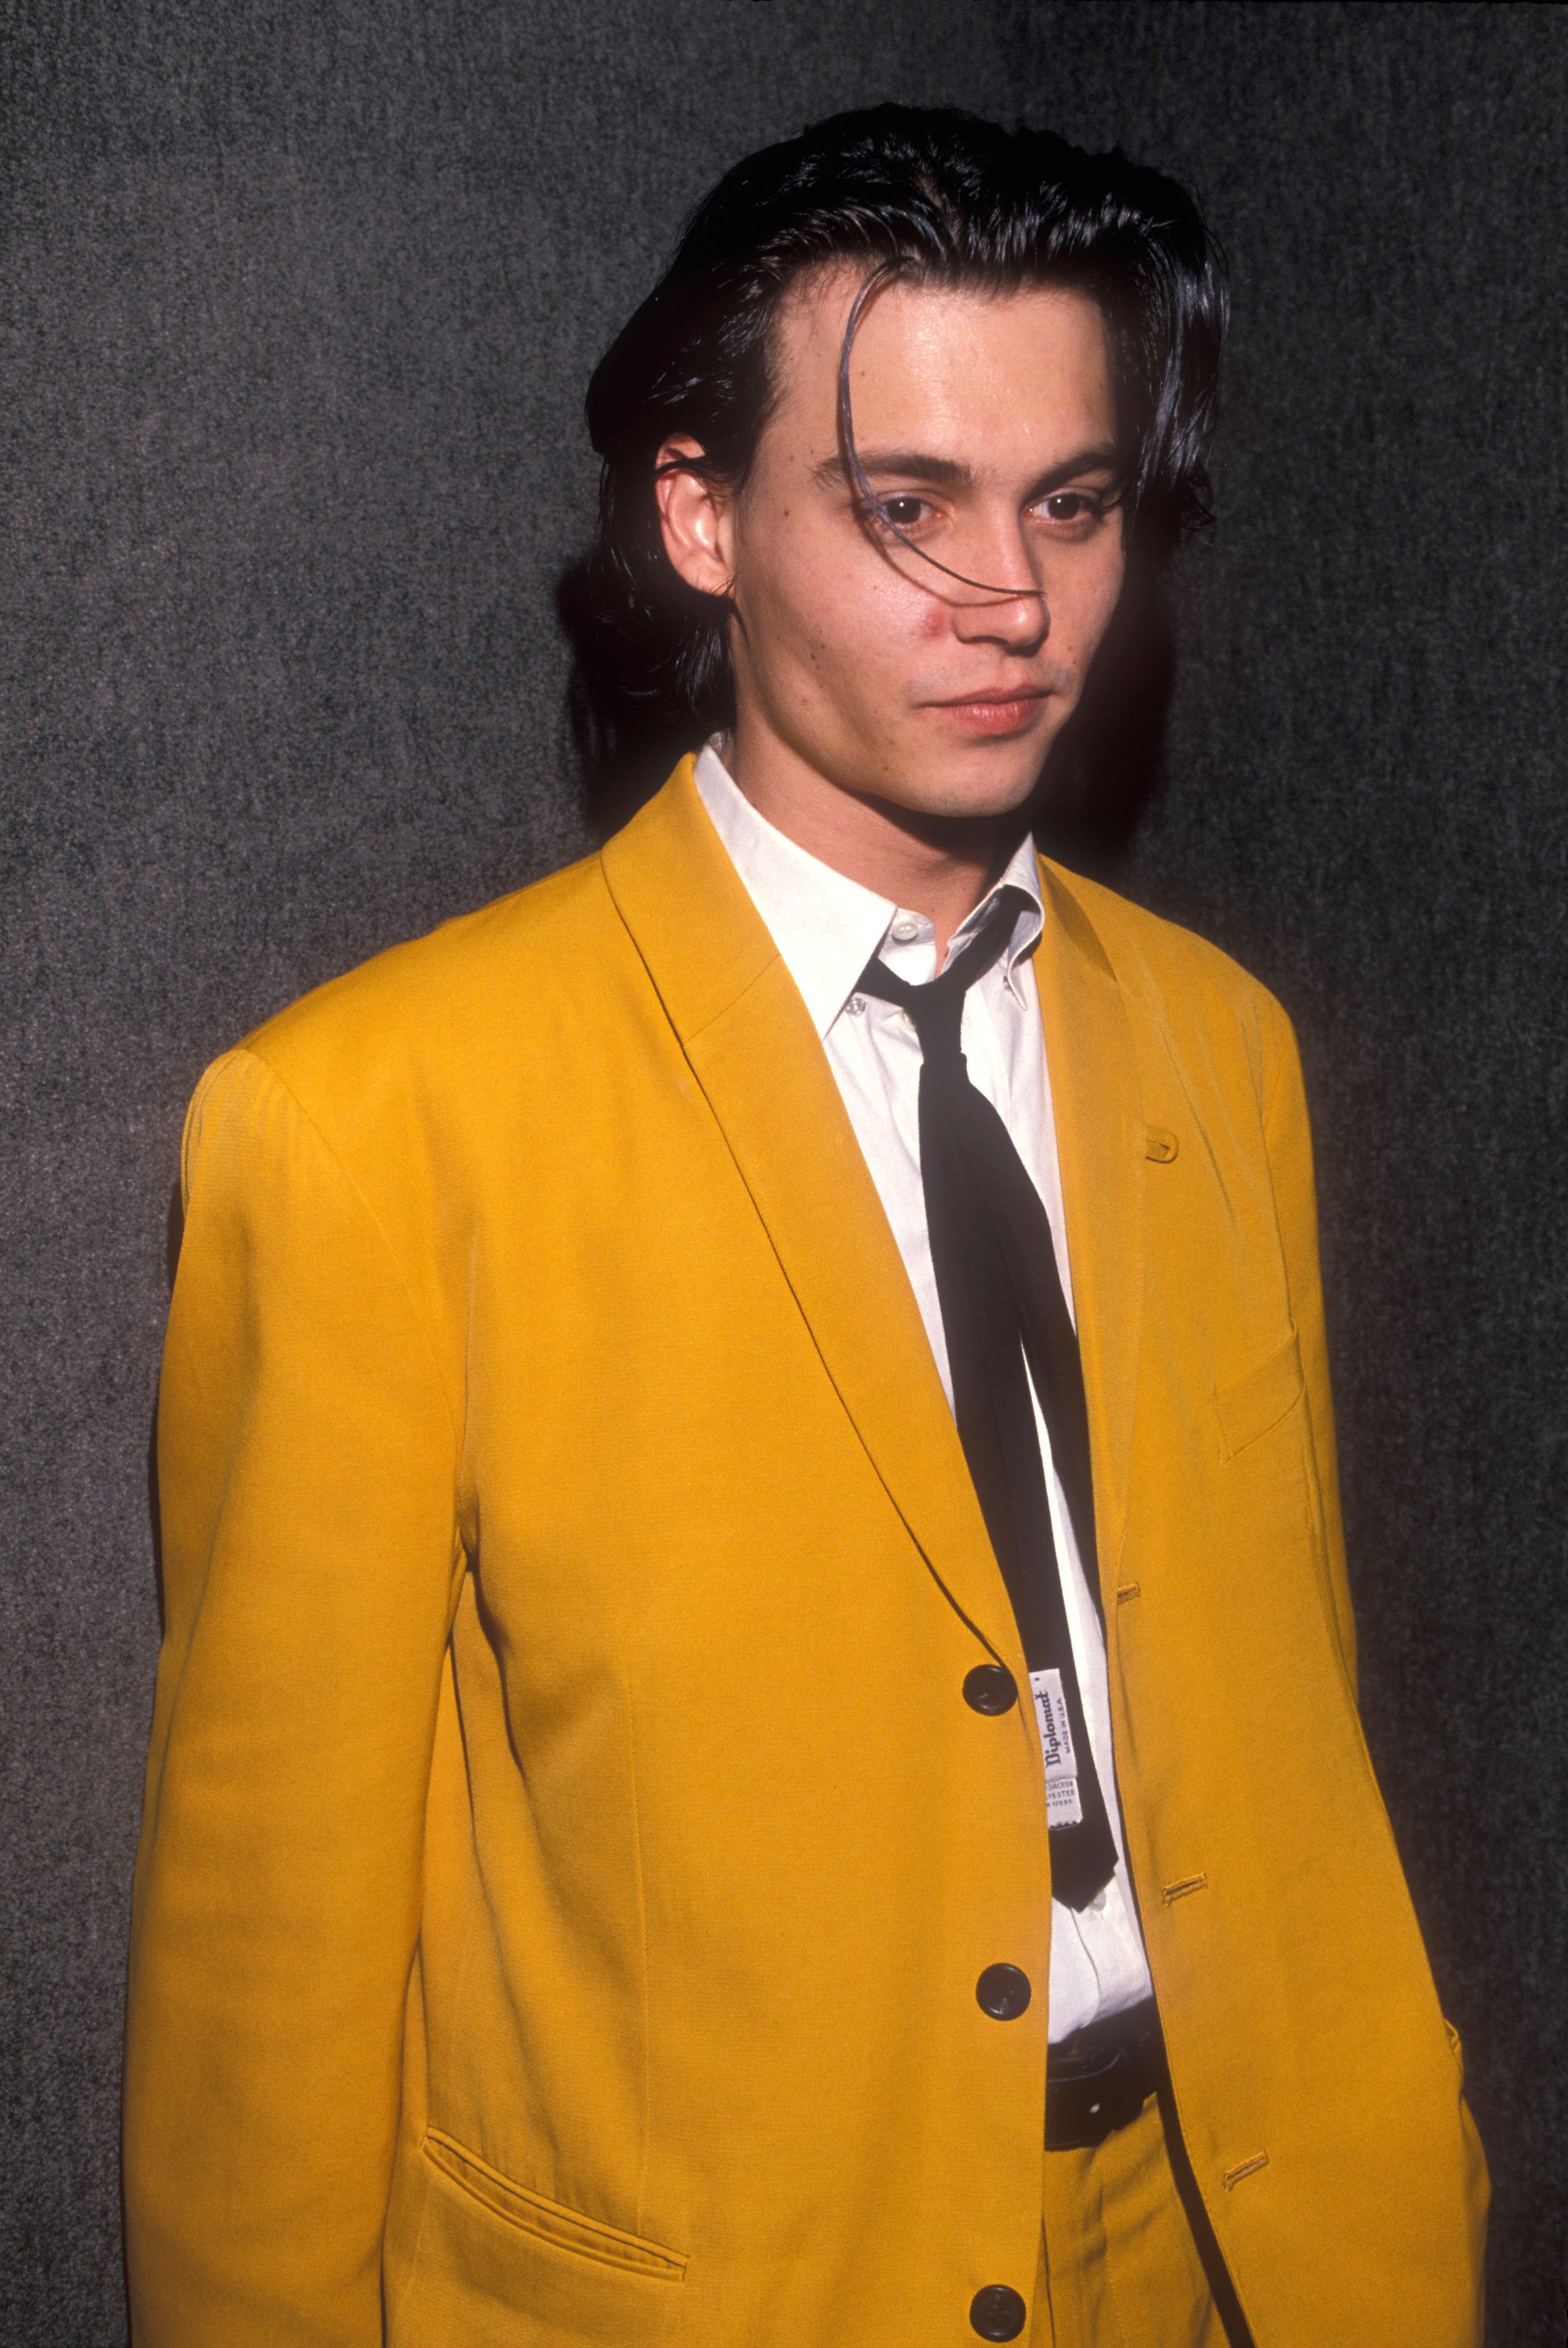 Johnny Depp at the Cry-Baby premiere in Baltimore, Maryland, on July 1, 1990. | Source: Ke.Mazur/WireImage/Getty Images